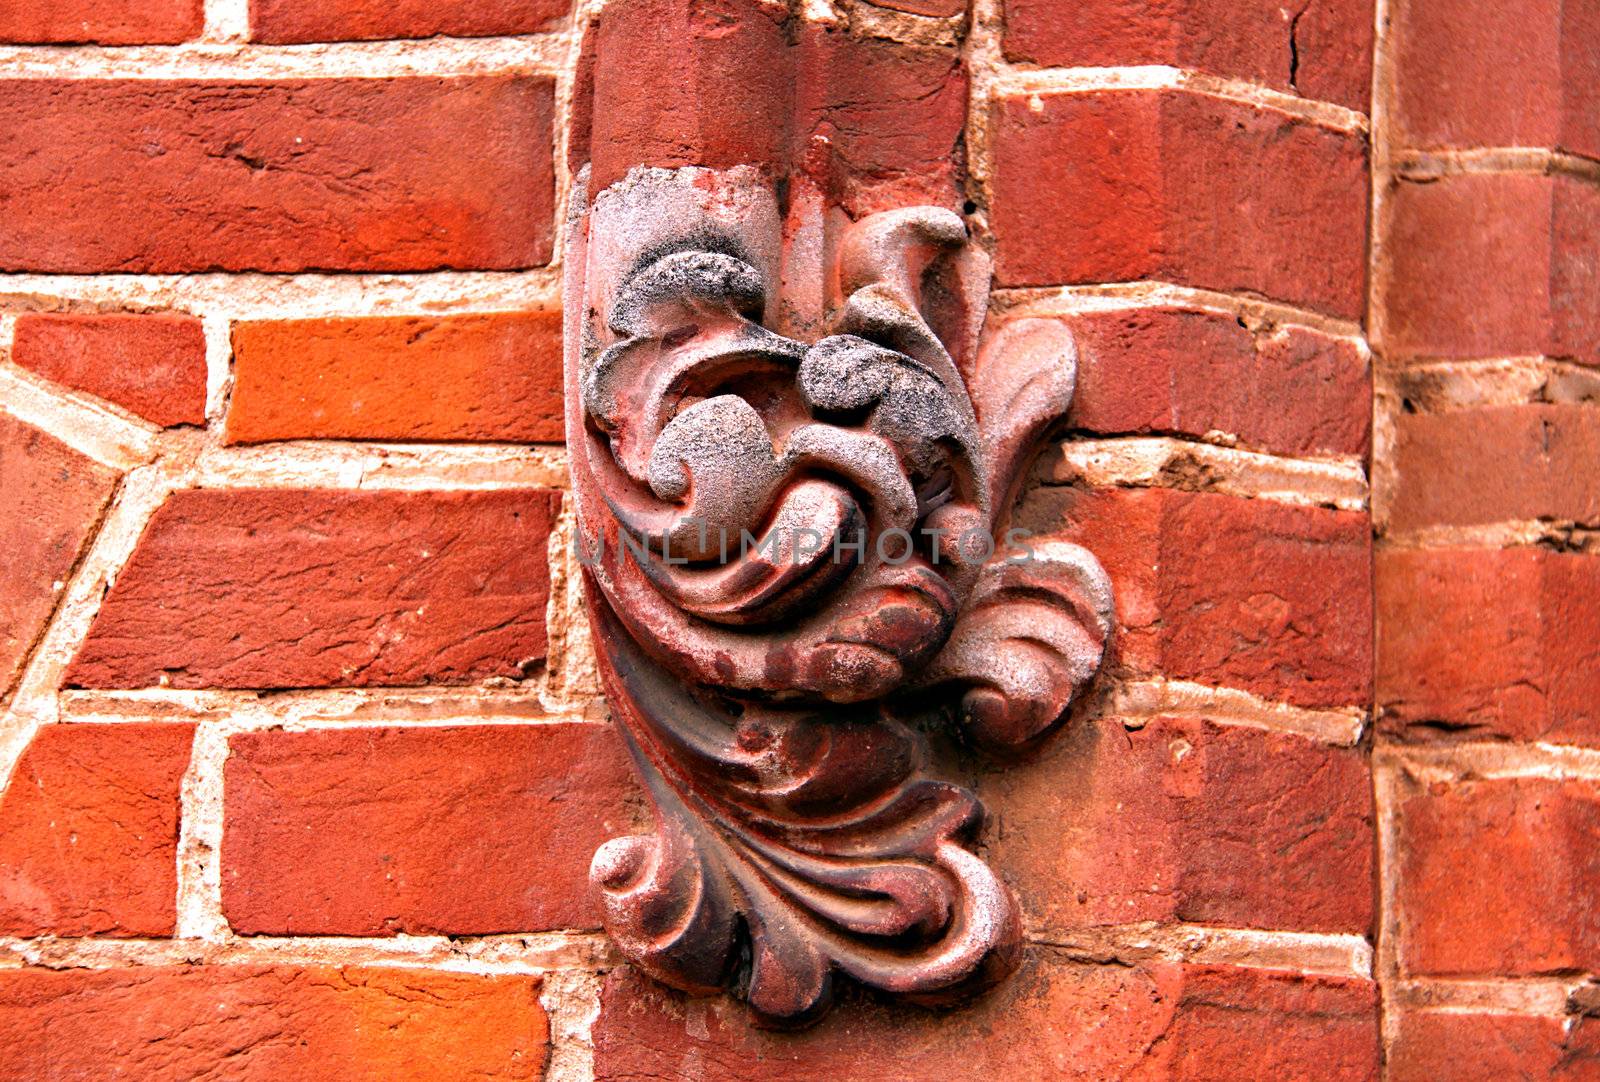 Ornate Decorations on Exterior Red Brick Wall. St Andrew's Church, Adelaide, Australia